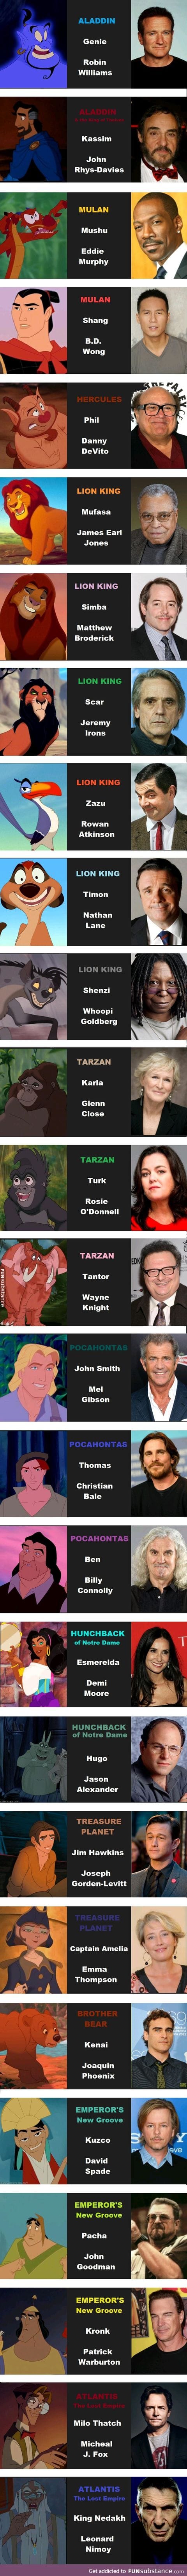 Some of the famous faces behind Disney characters